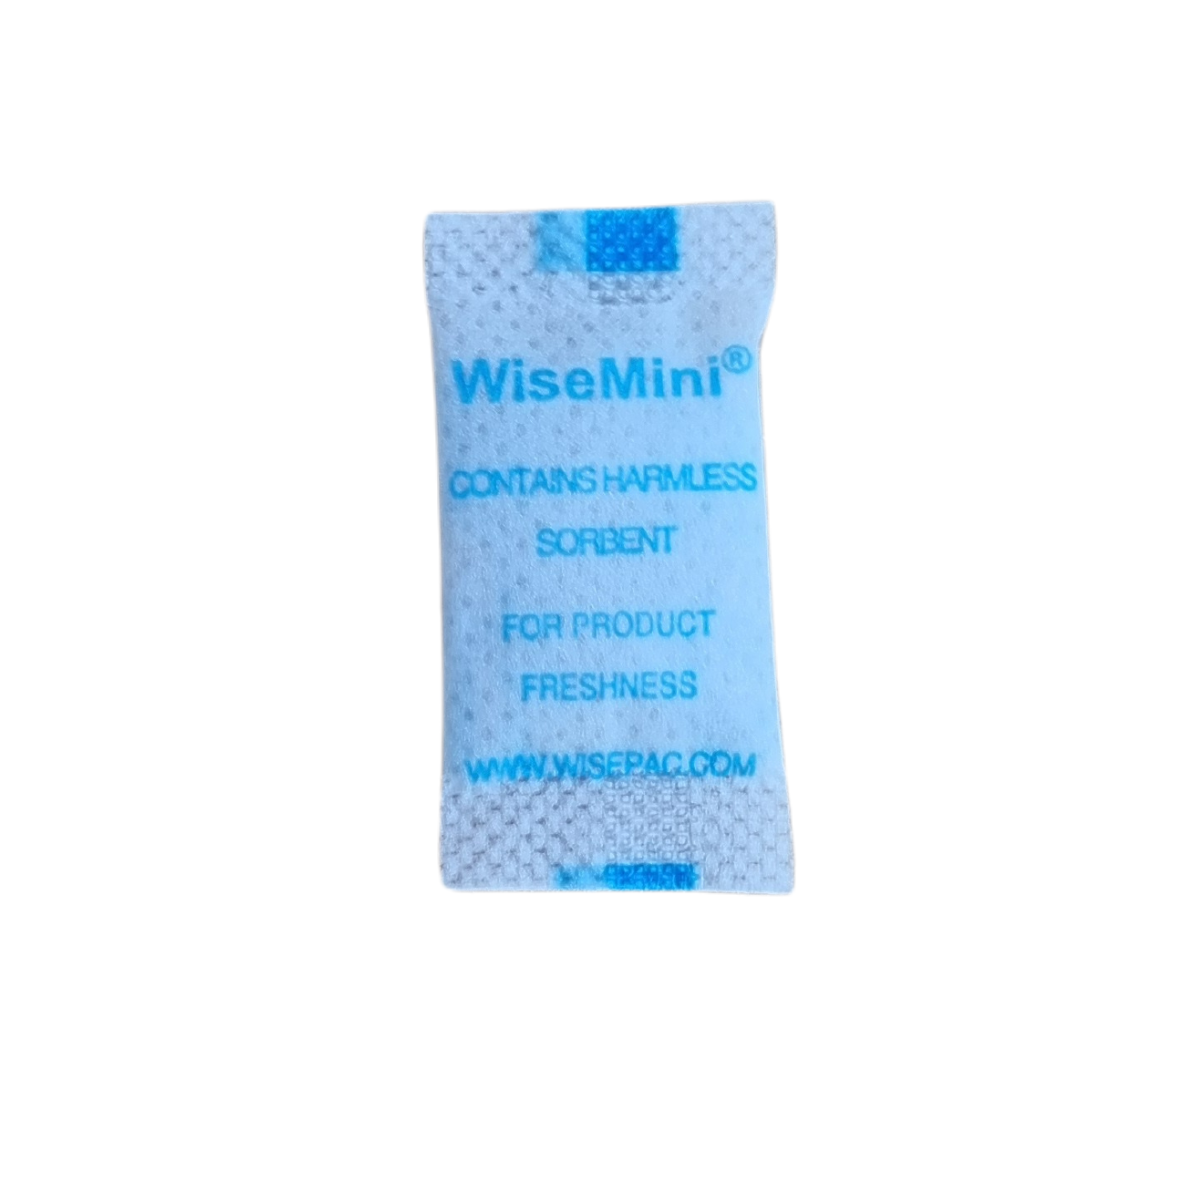 The smallest in our range of silica gel sachets, the 0.5g sachet adsorbs up to 30% of its weight.